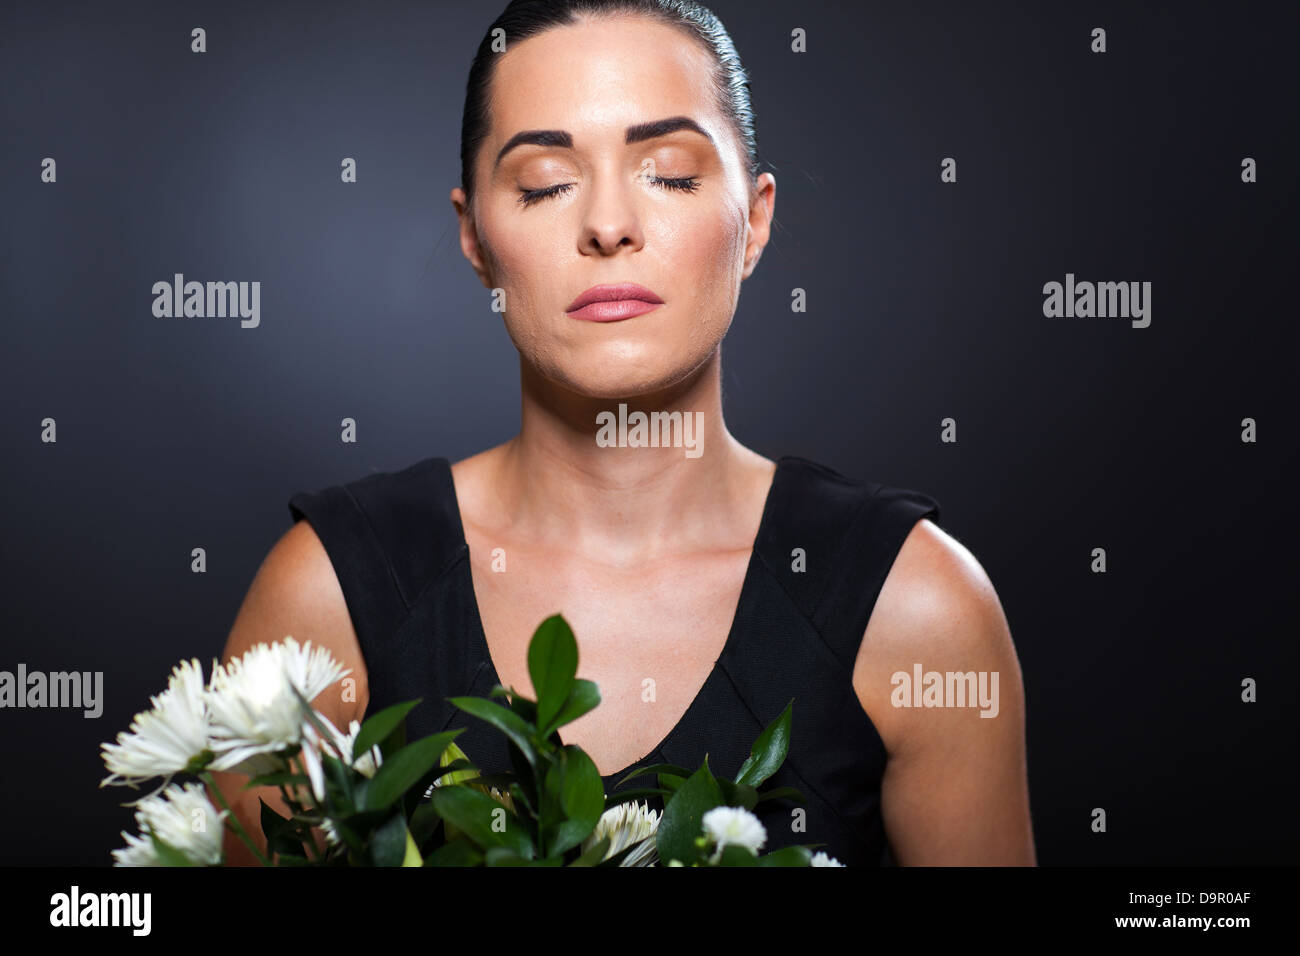 sad young woman in sorrow with tears on her face Stock Photo